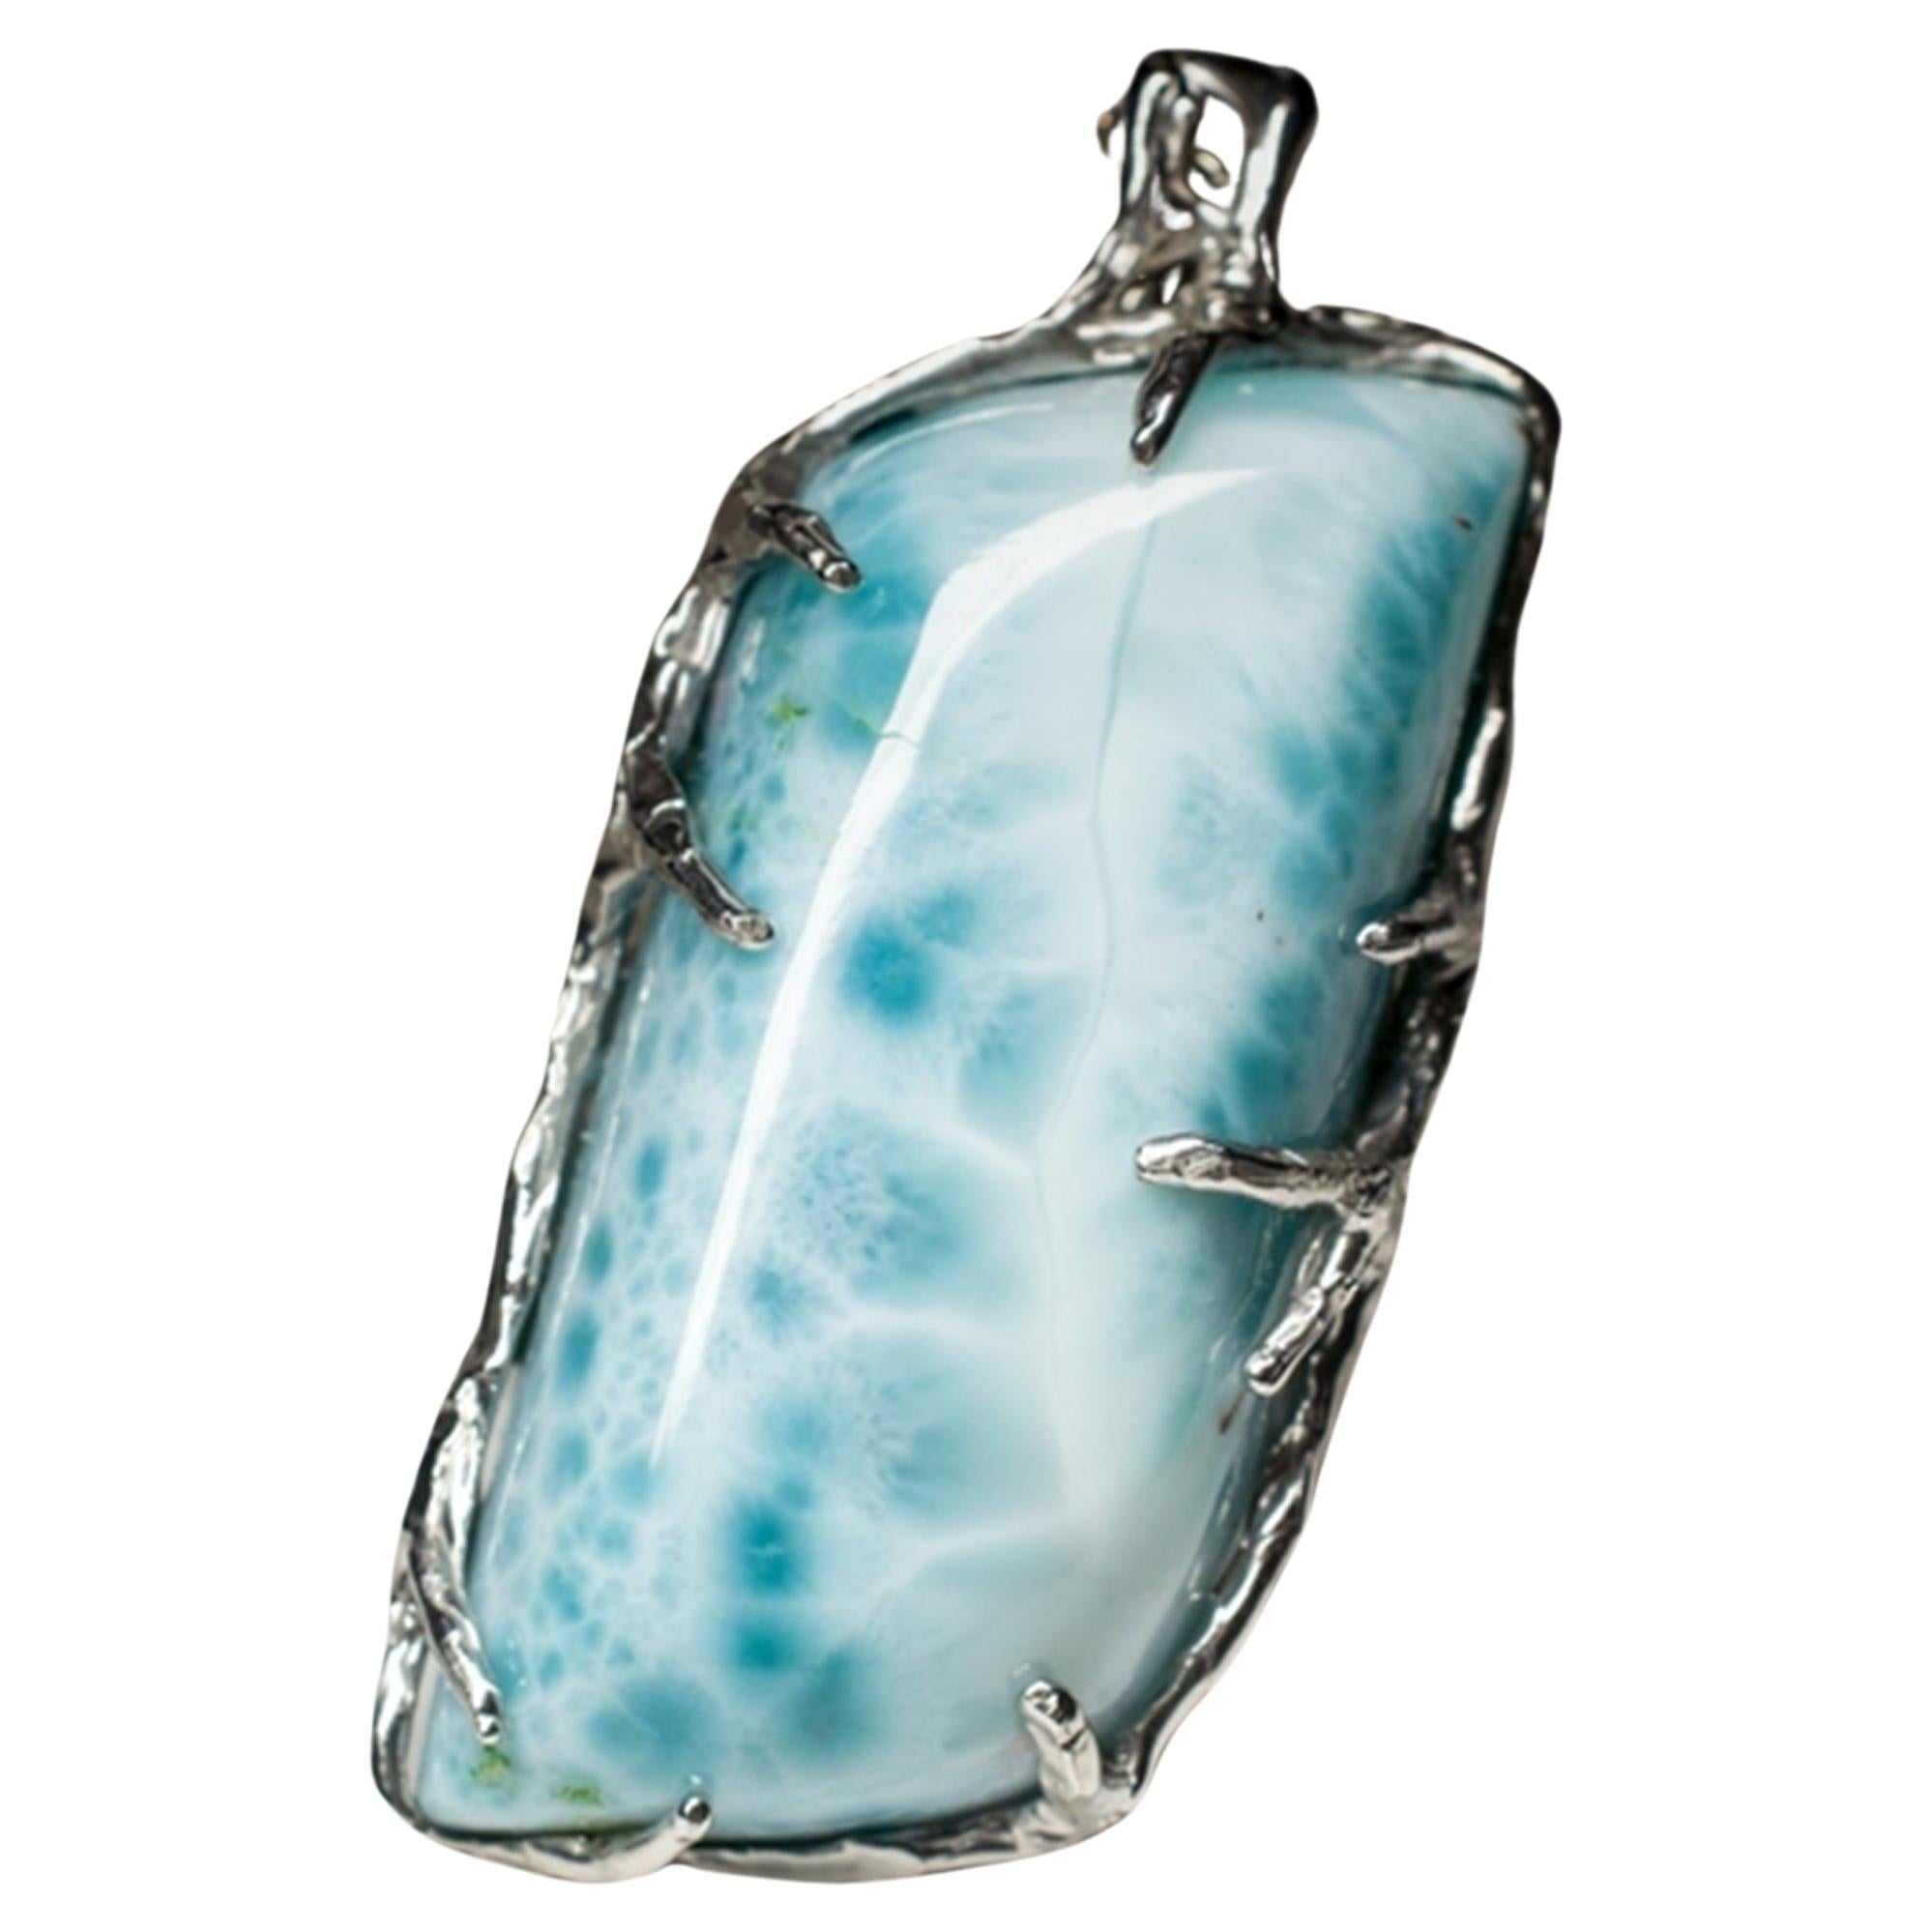 Larimar Silver necklace Blue pendant special person gift wedding anniversary For Sale